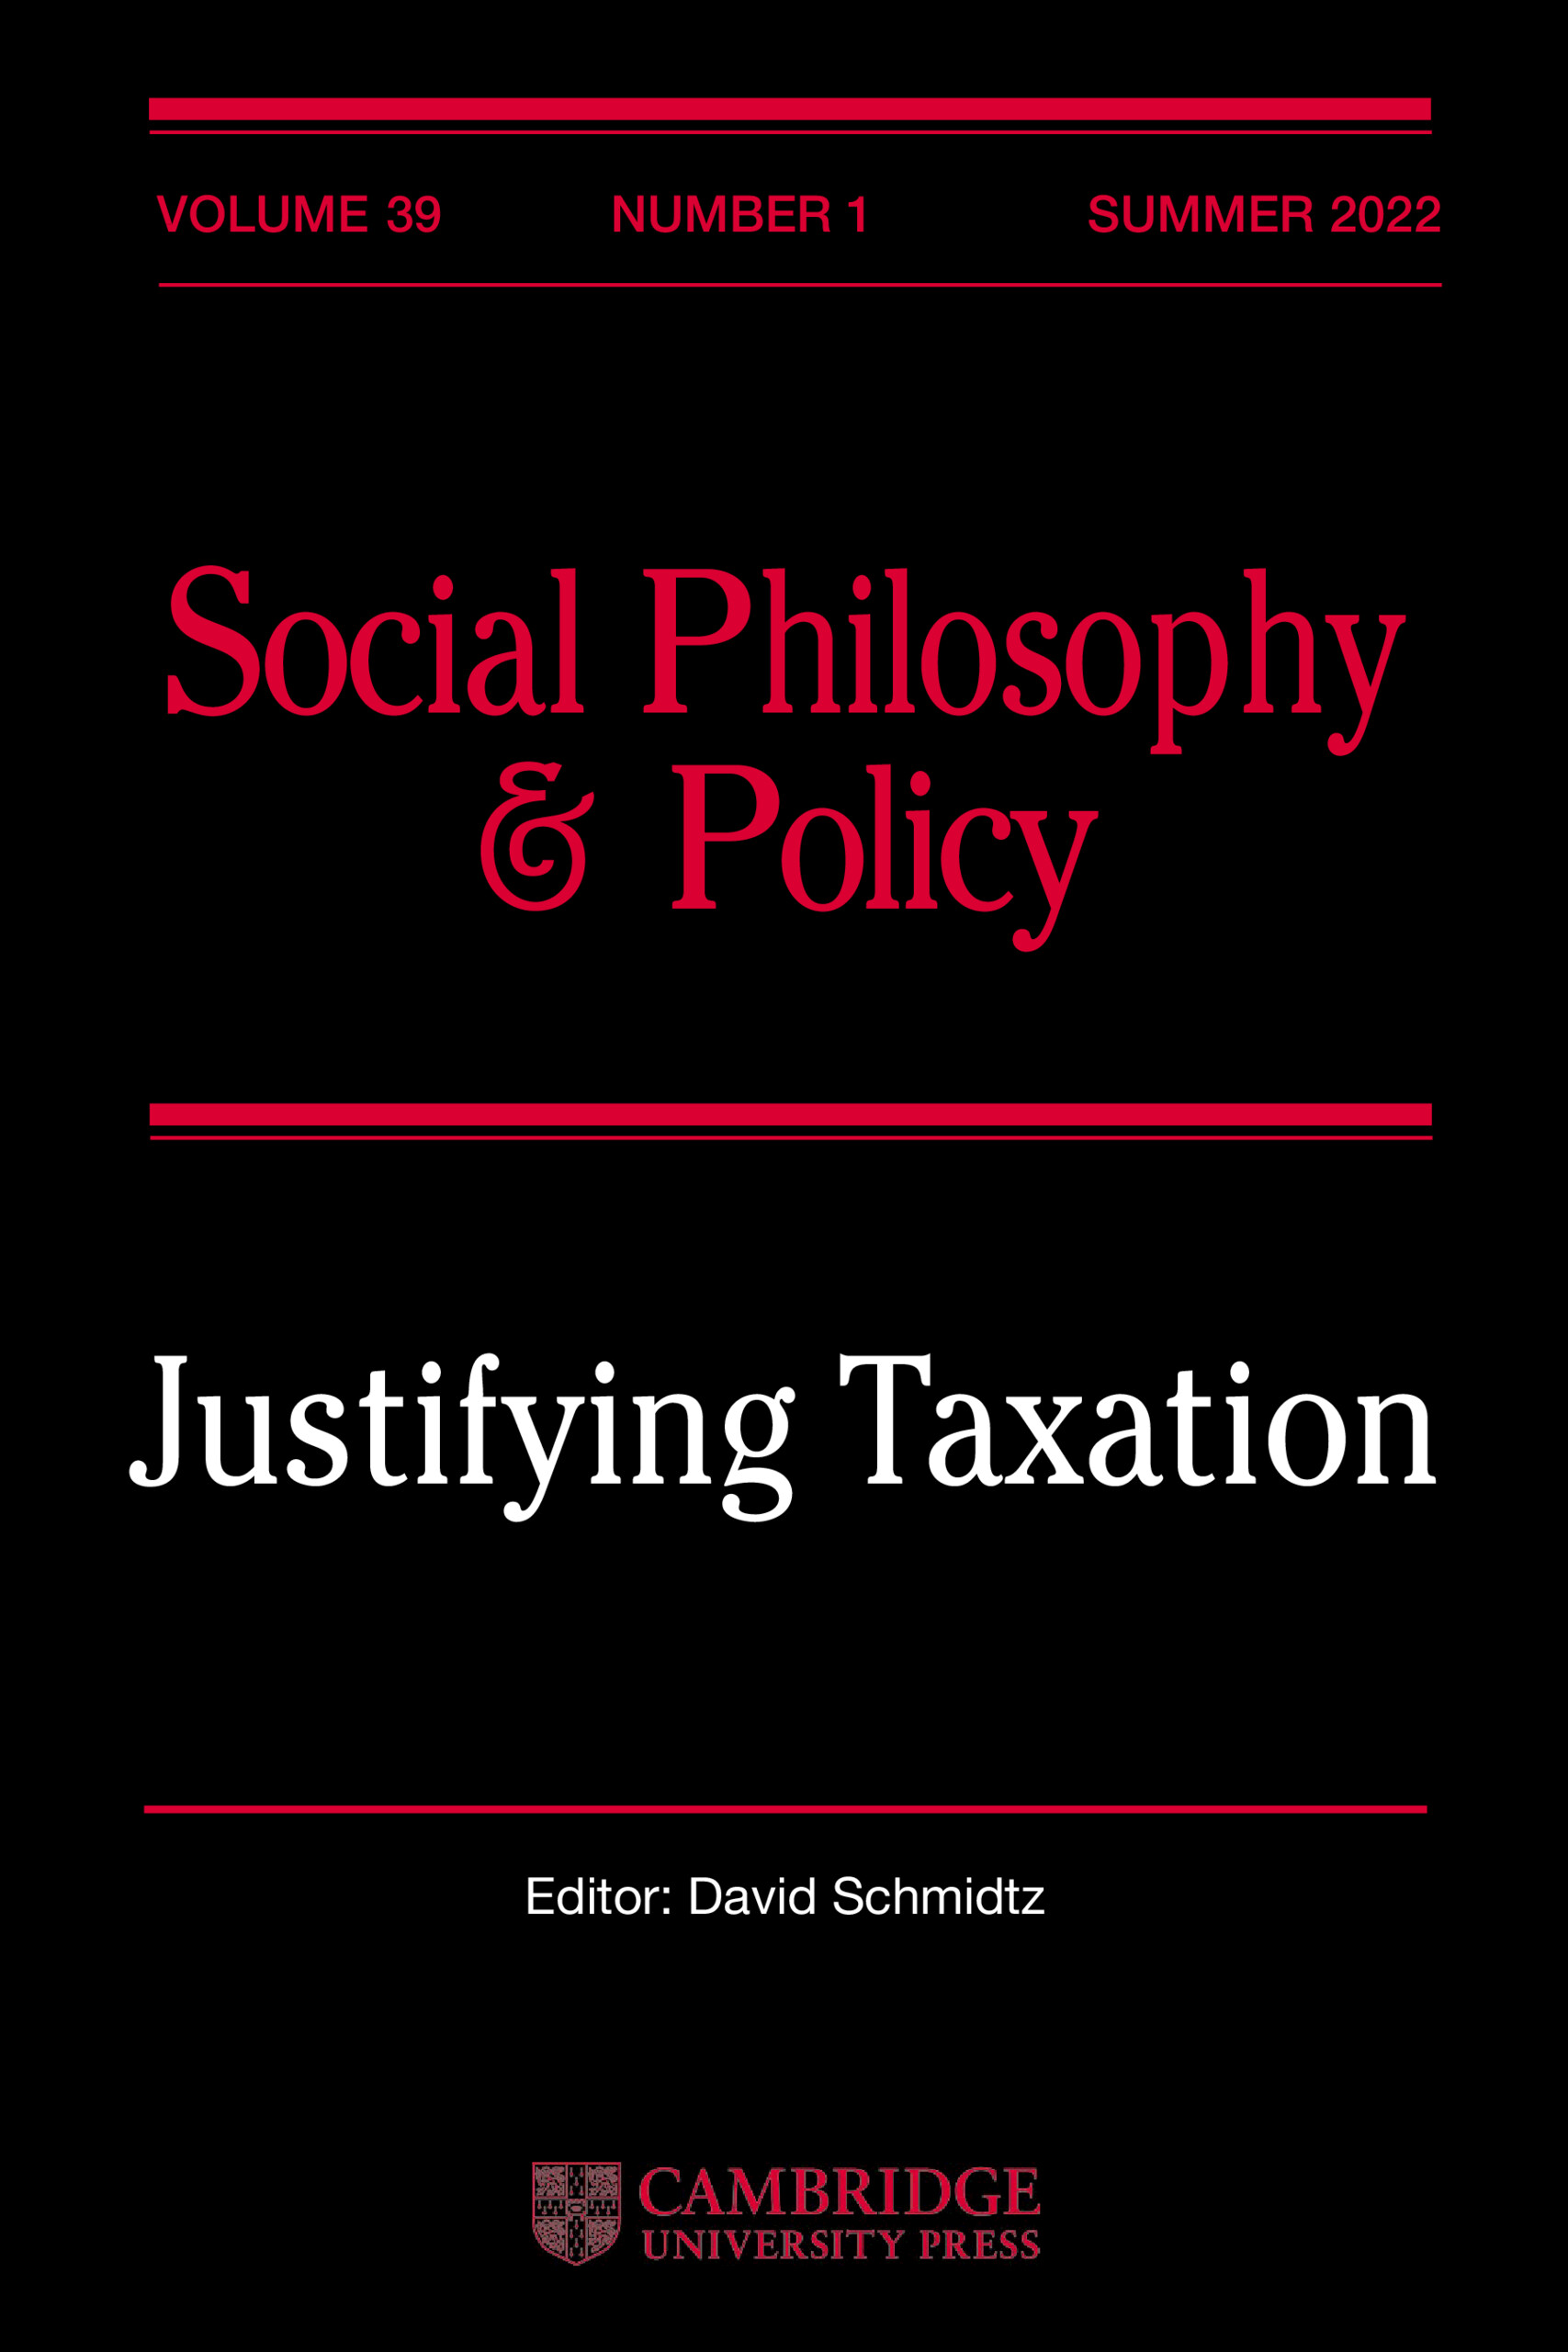 Social philosophy and policy.